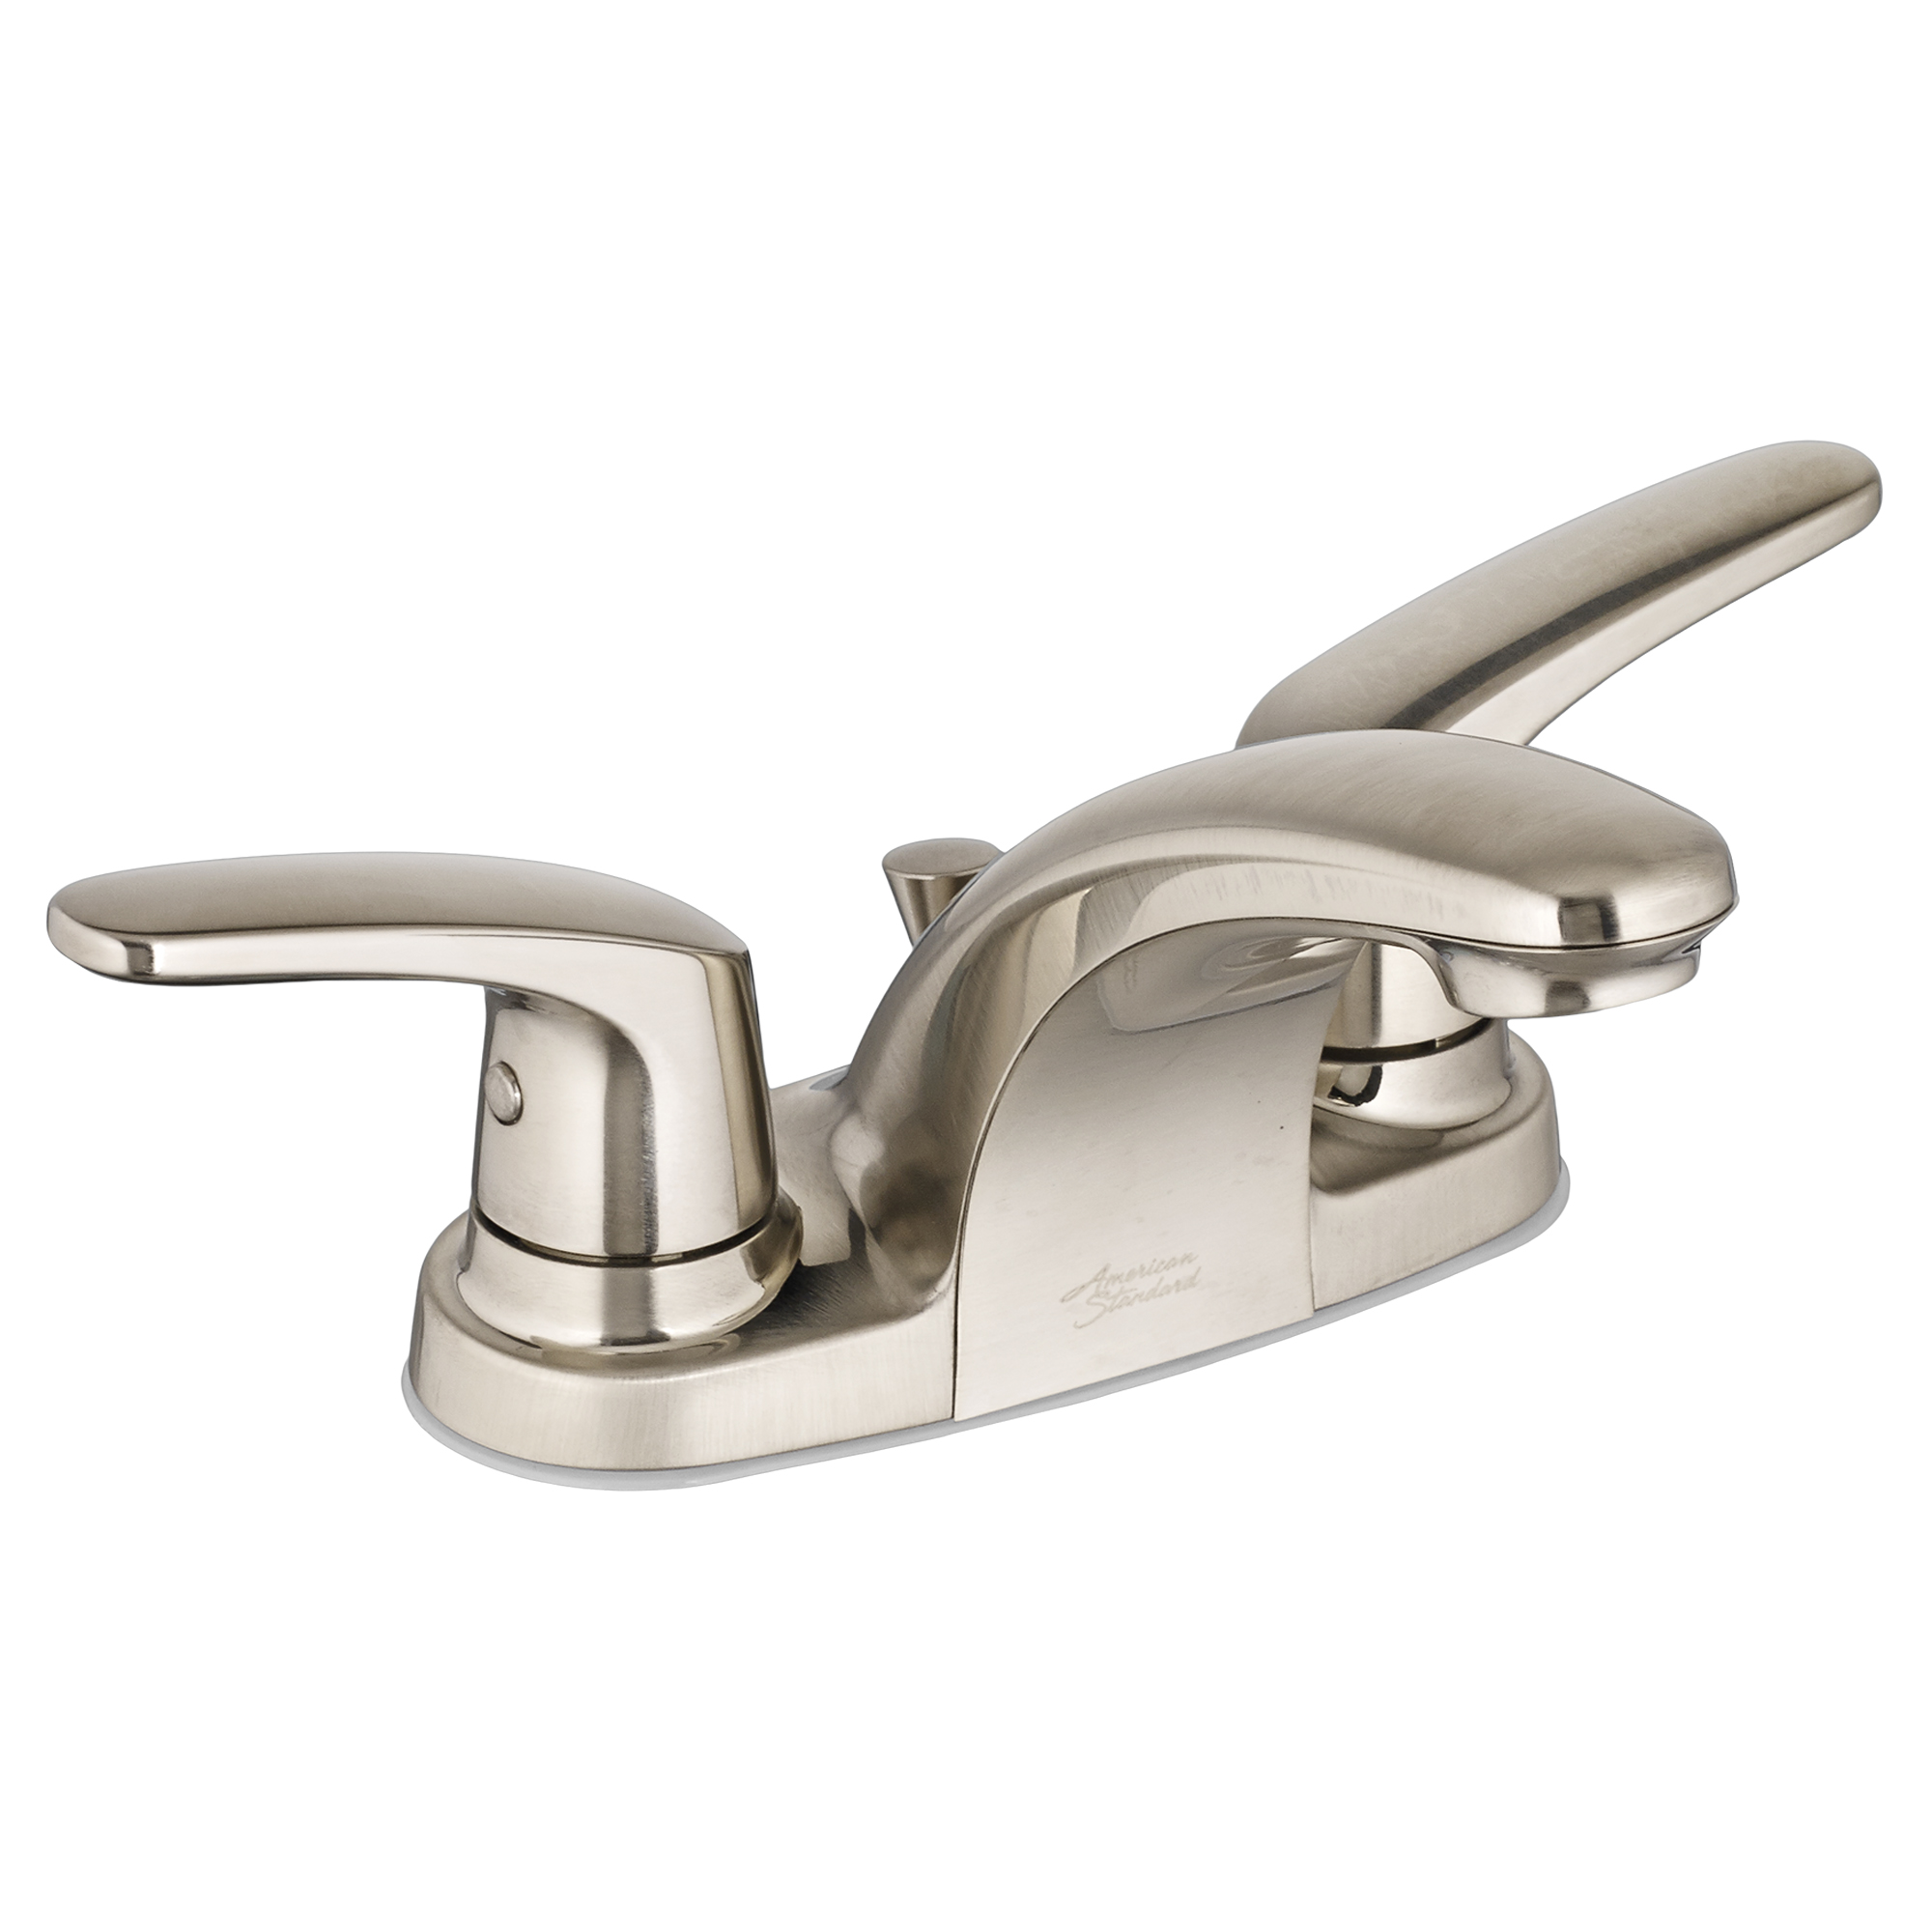 Colony® PRO 4-Inch Centerset 2-Handle Bathroom Faucet 1.2 gpm/4.5 Lpm With Lever Handles